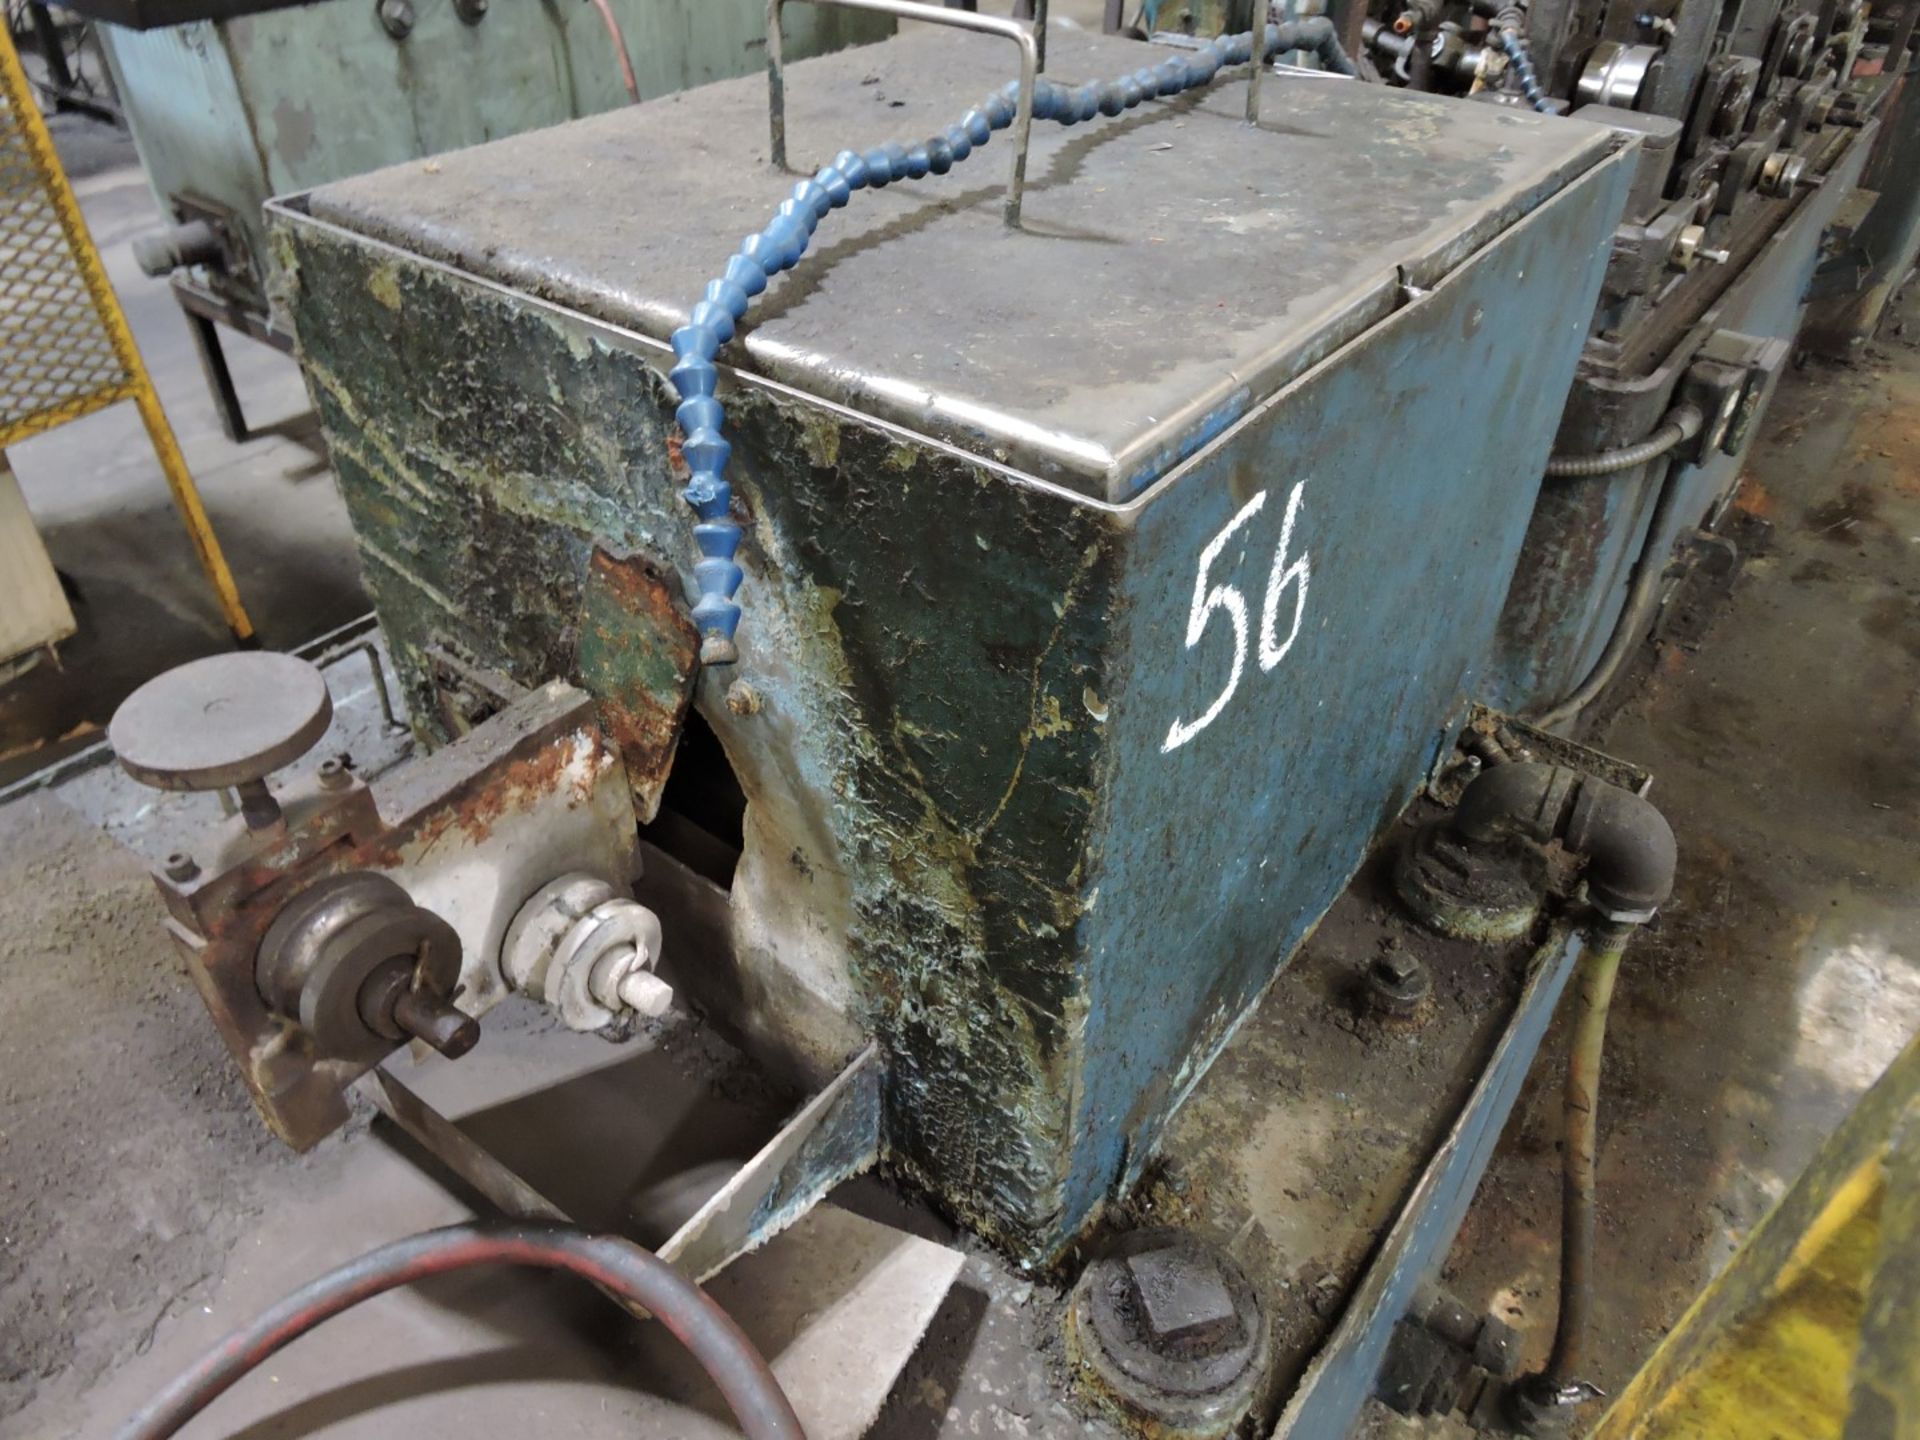 Abbey Etna Tube Mill, Ajax Tocco Heating and Cooling, Gear Box missing, not currently in running - Image 9 of 15